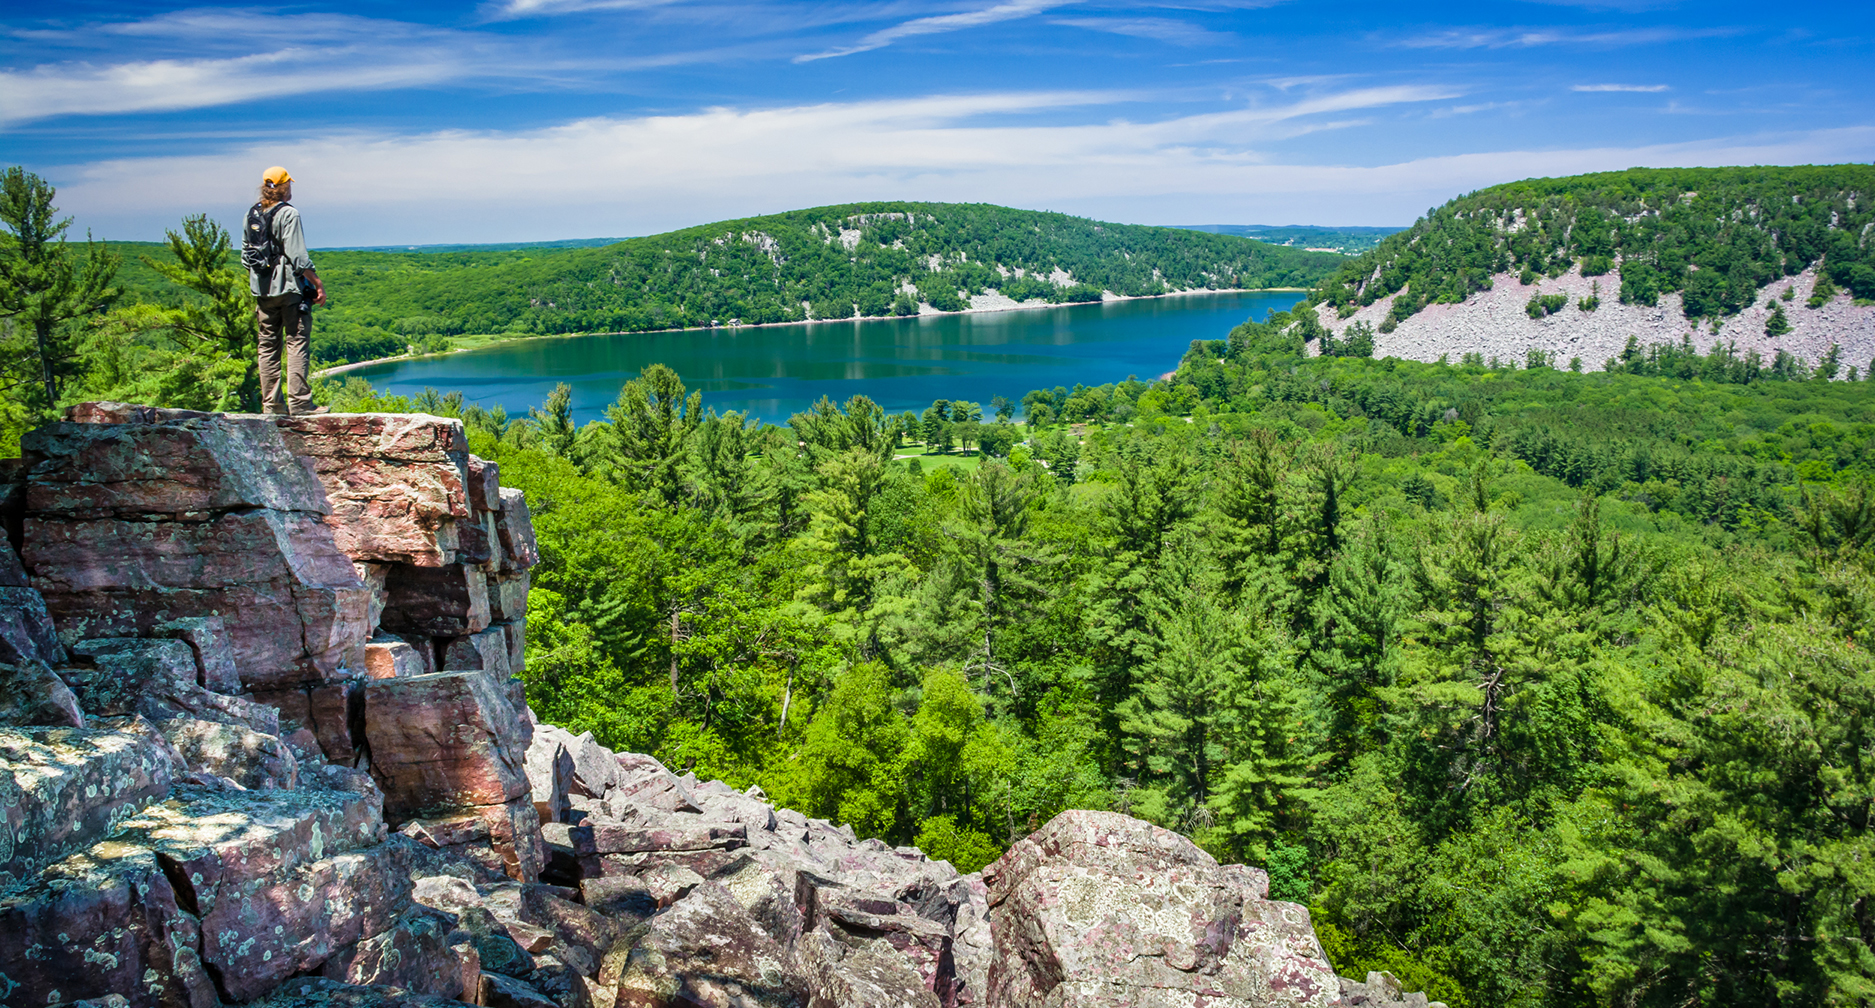 What Is There To Do Around Devil’s Lake?